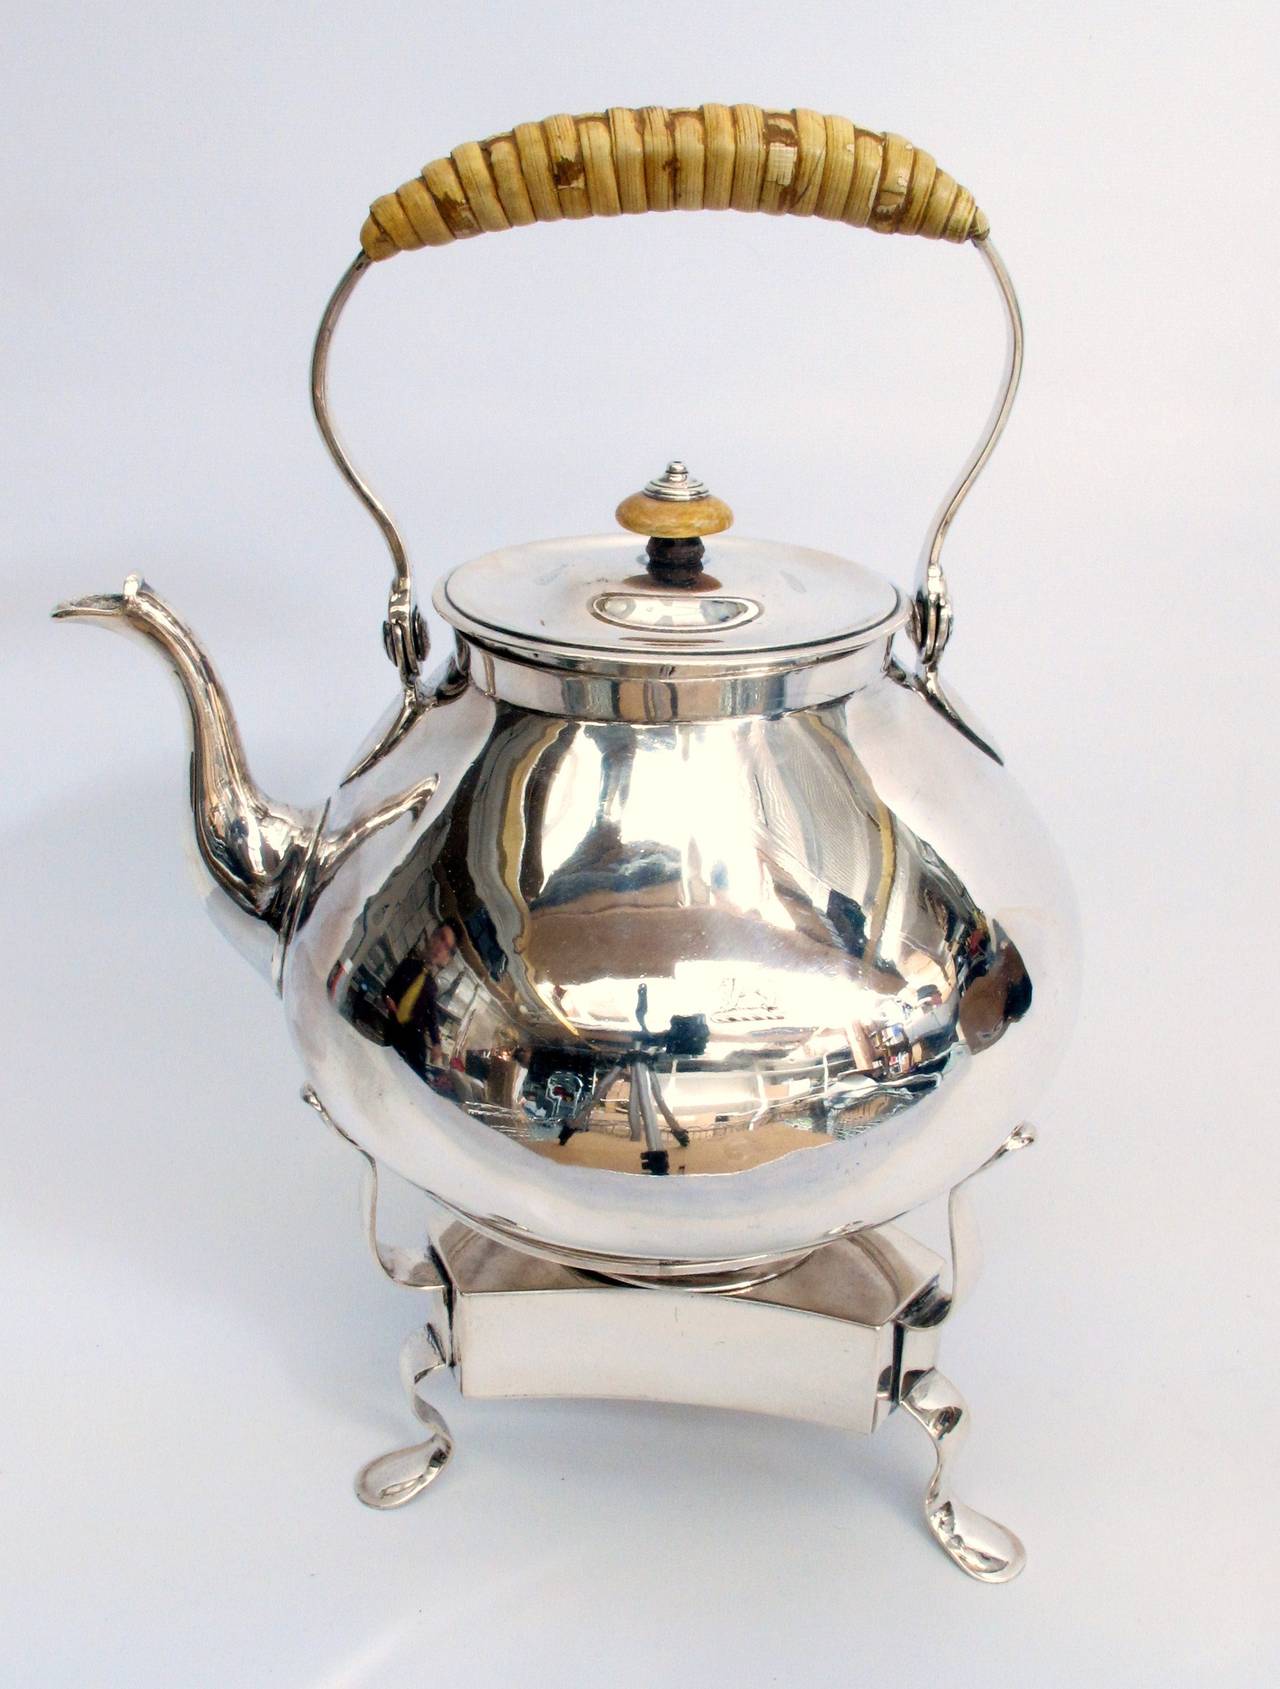 Elegant sterling silver water kettle and stand by Thomas Heming. 
London 1763

9.5